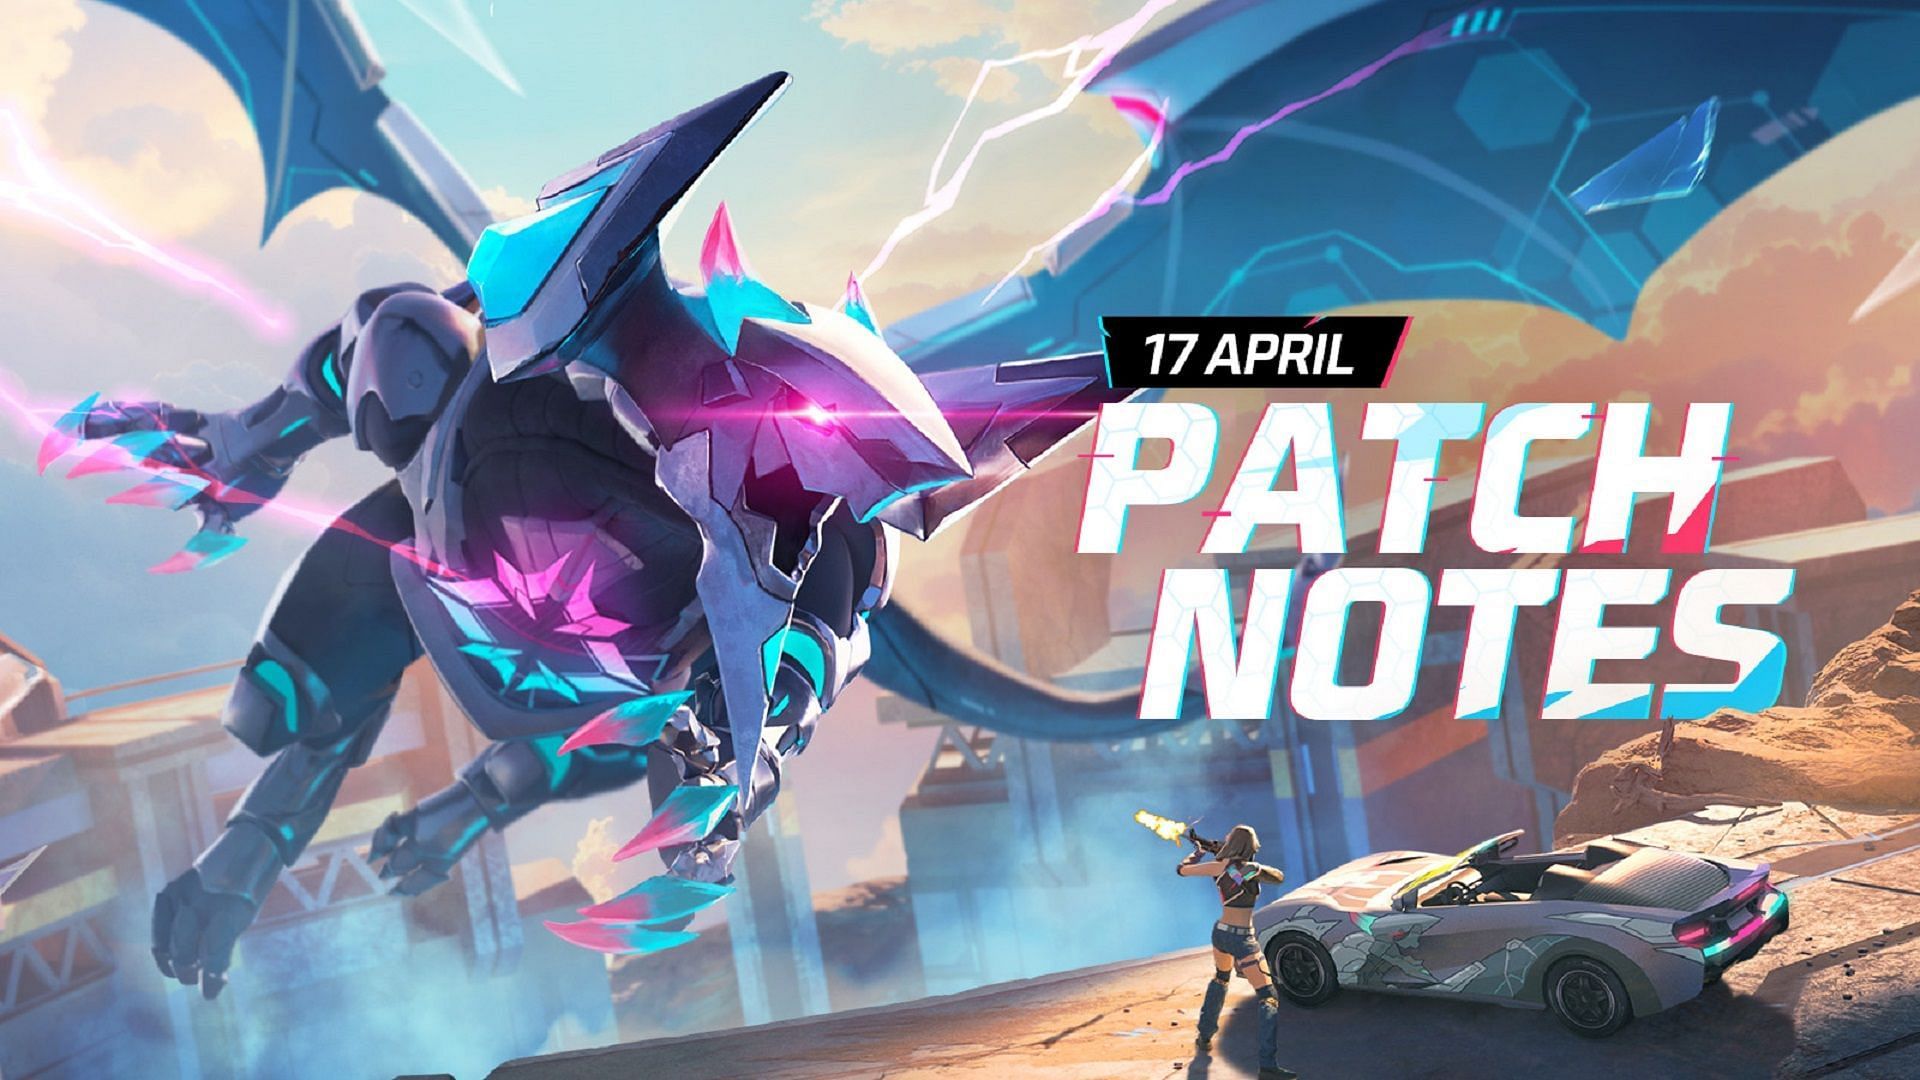 Garena has released the patch notes for the Free Fire OB44 update (Image via Garena)